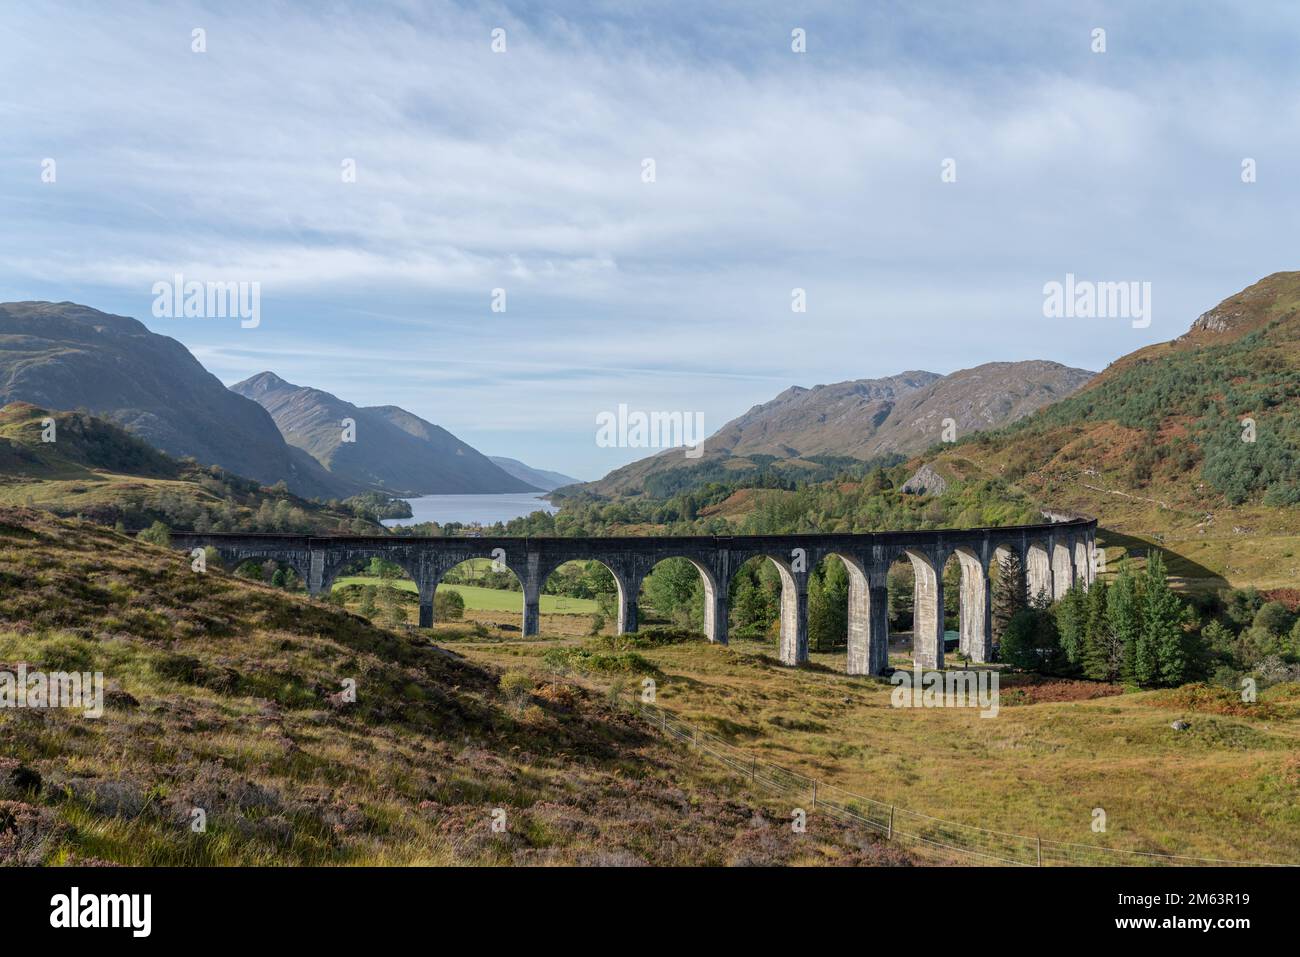 Glenfinnan Railway Viaduct in the Scottish Highlands, Scotland. famous arched viaduct used by steam trains in the mountains. Aerial view with loch Stock Photo